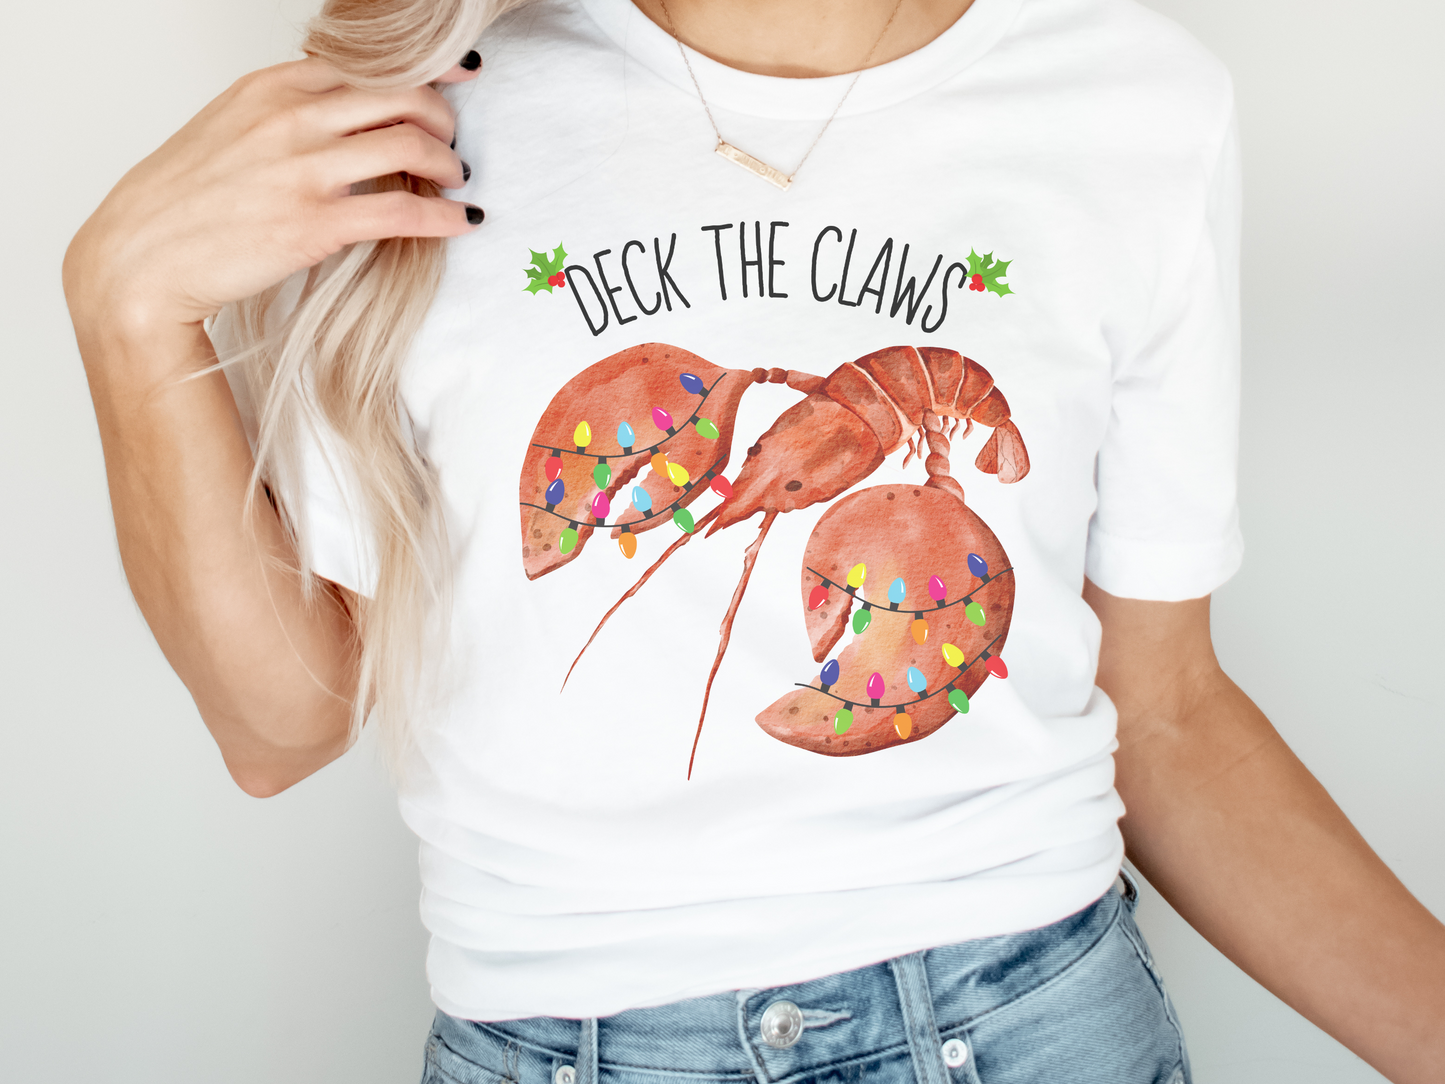 Deck The Claws Crustaceancore Unisex Holiday Tee